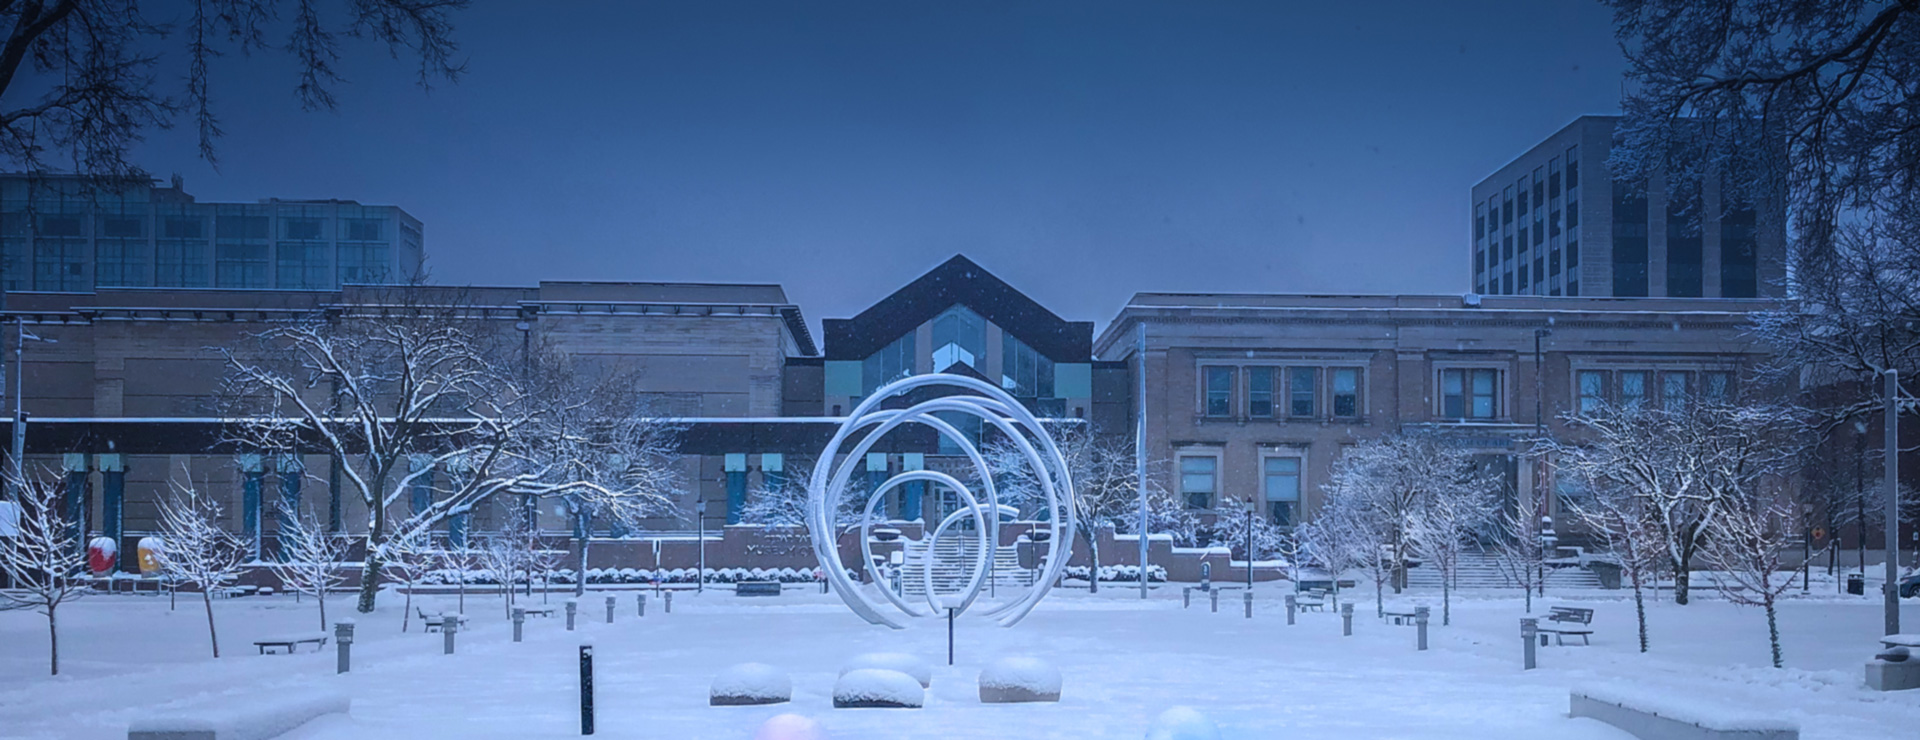 A sculpture in Greene Square is surrounded by winter snow.